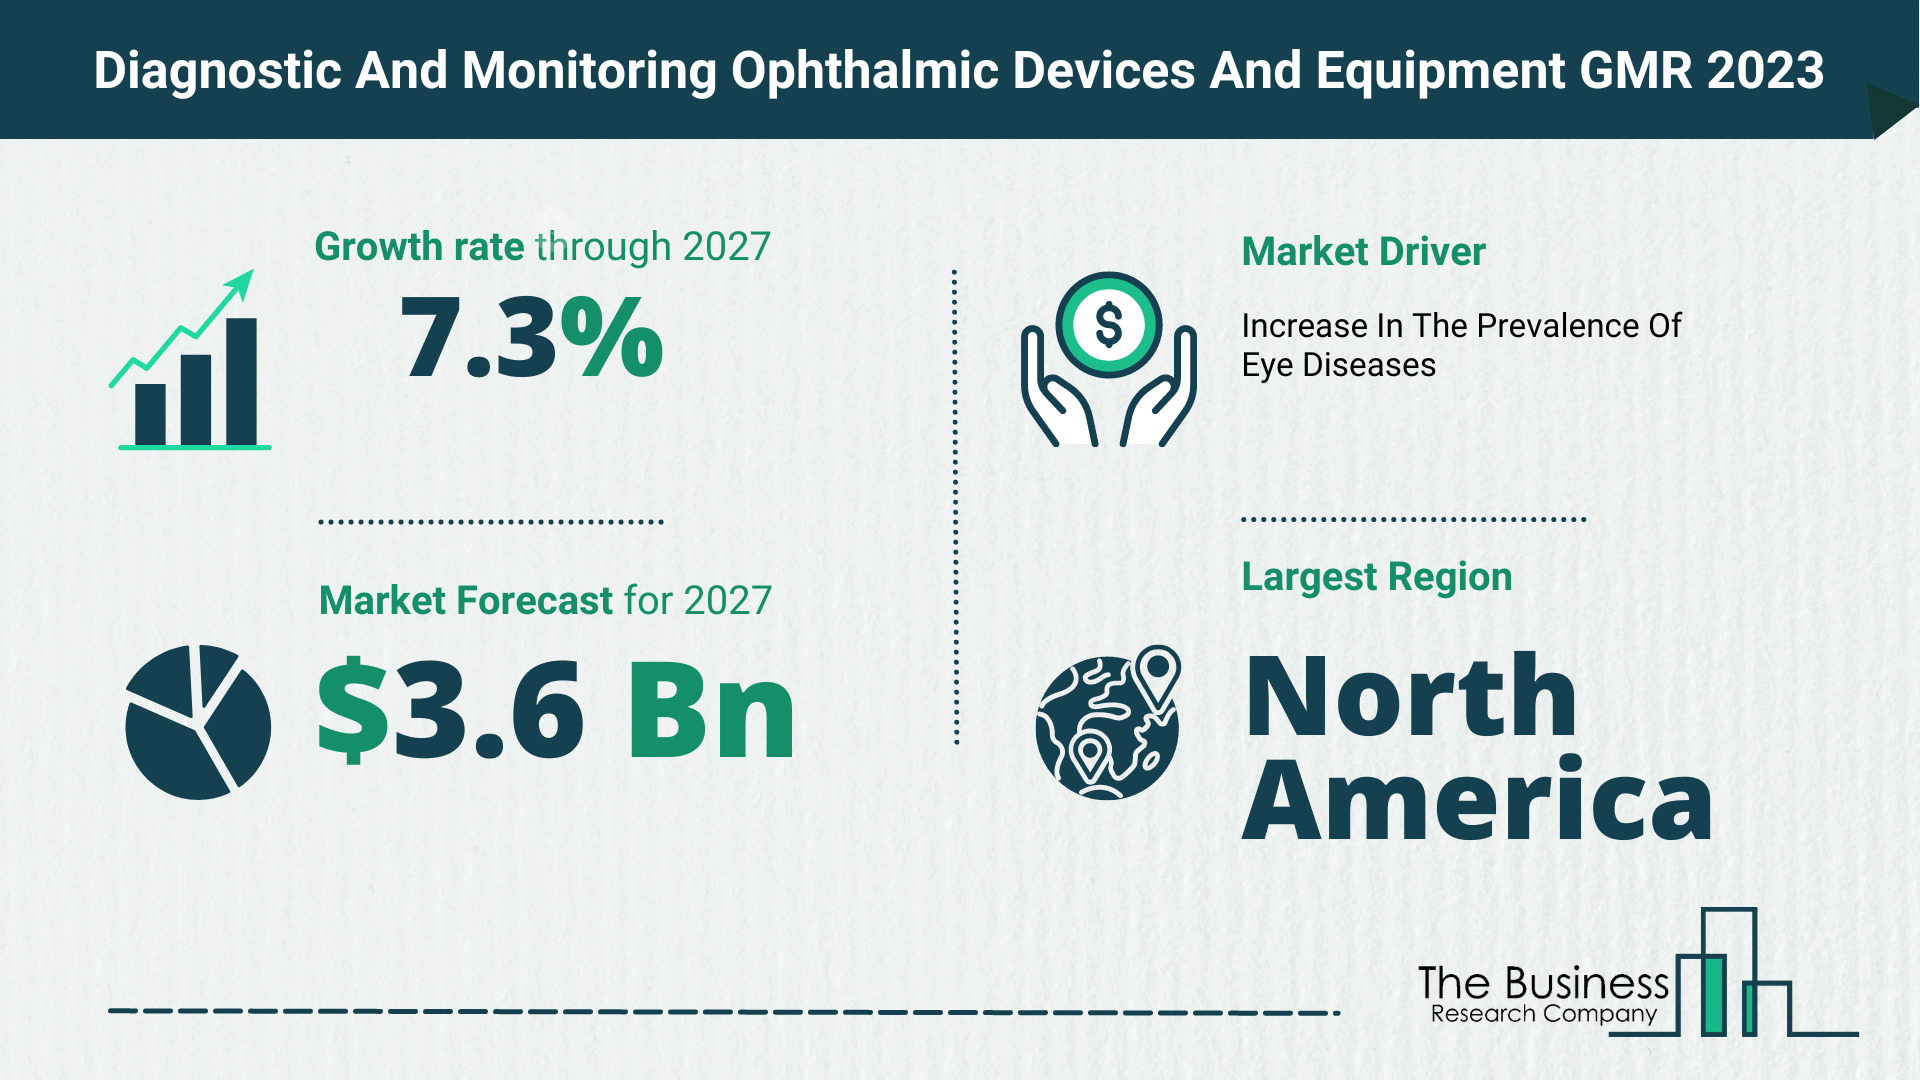 Global Diagnostic And Monitoring Ophthalmic Devices And Equipment Market